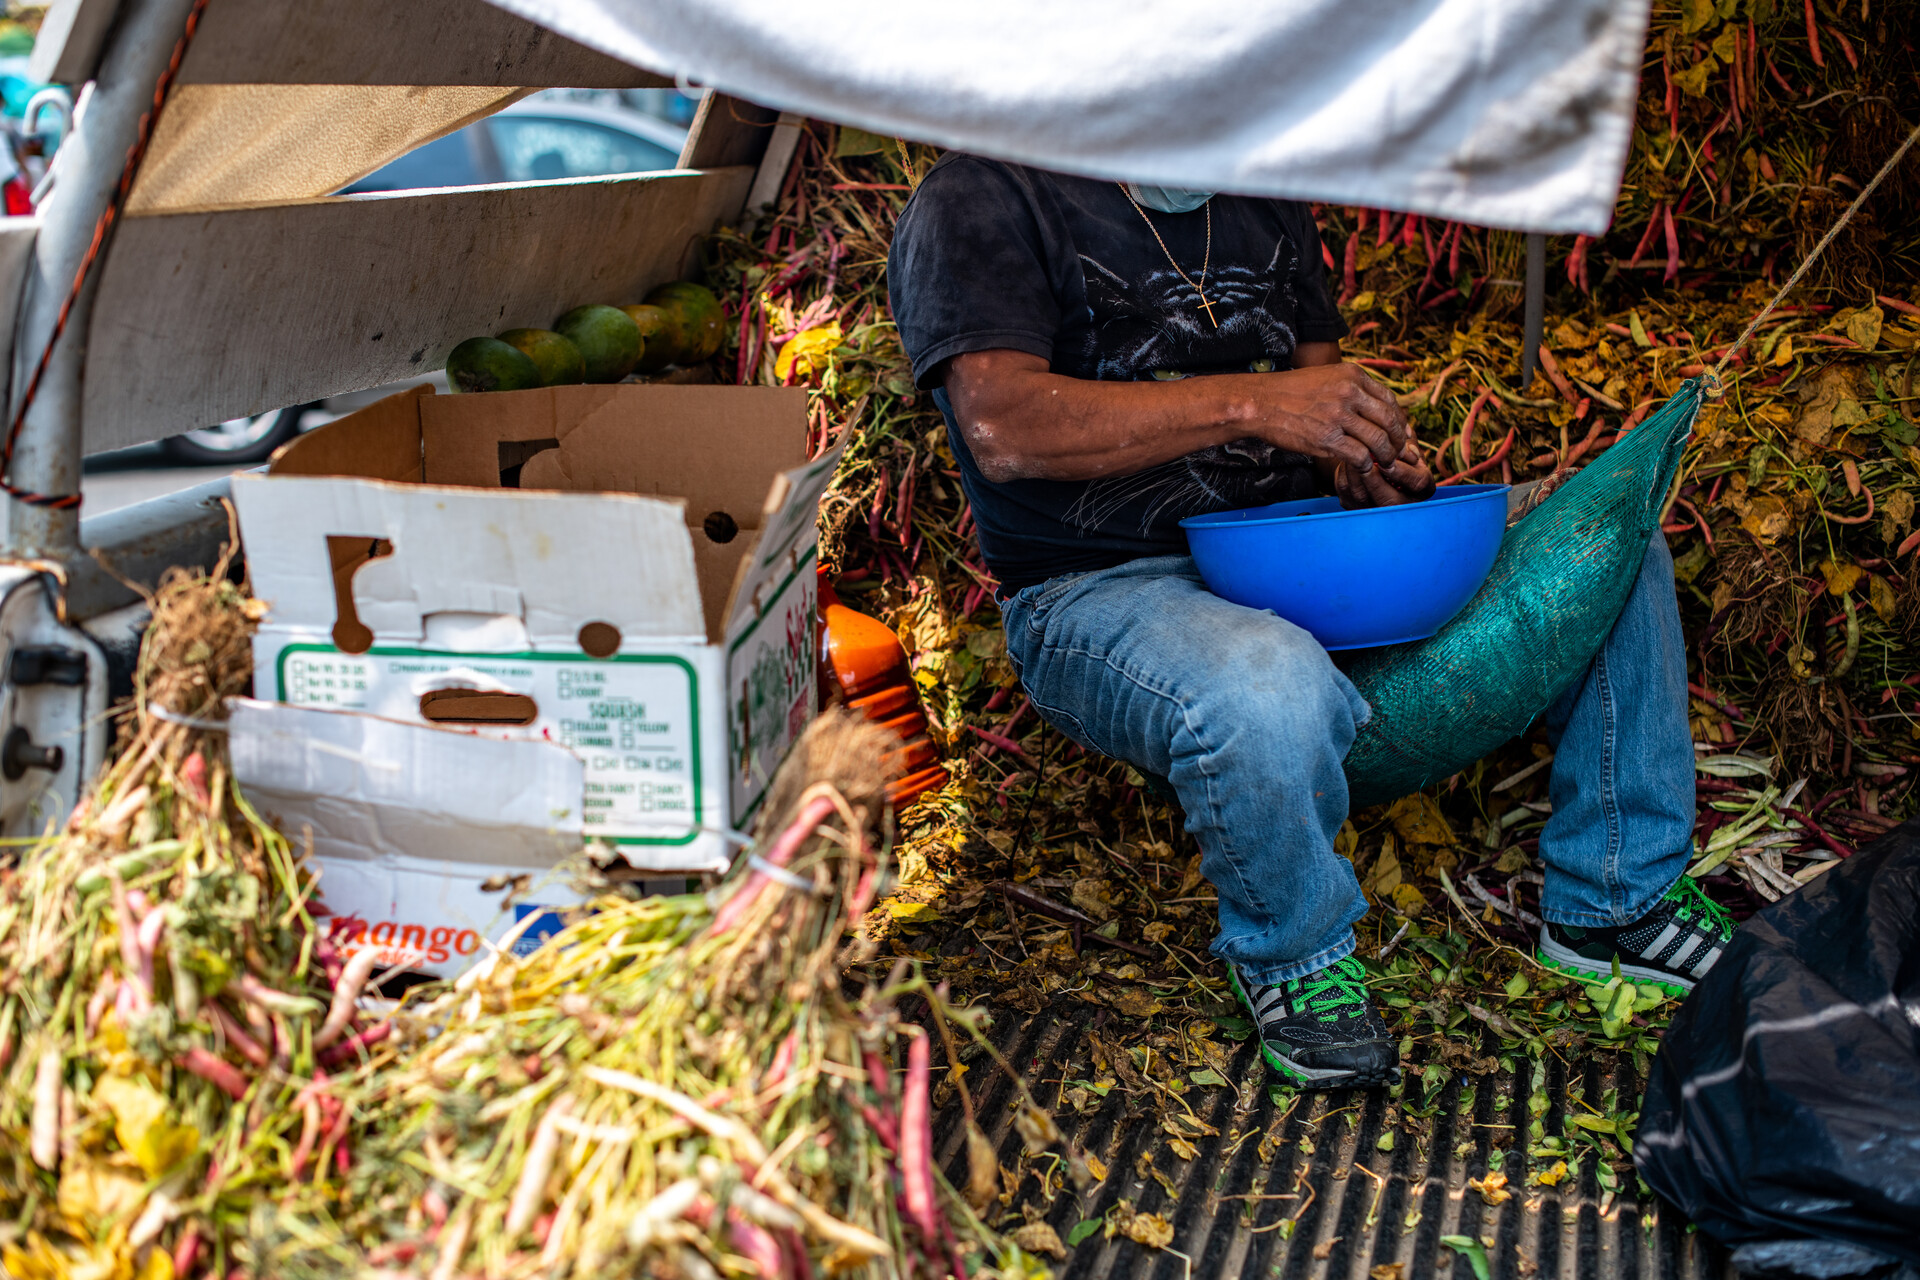 A man, face concealed by a tarp, sit surrounded by bundles of dried red beans, shelling them into a bucket in his lap.